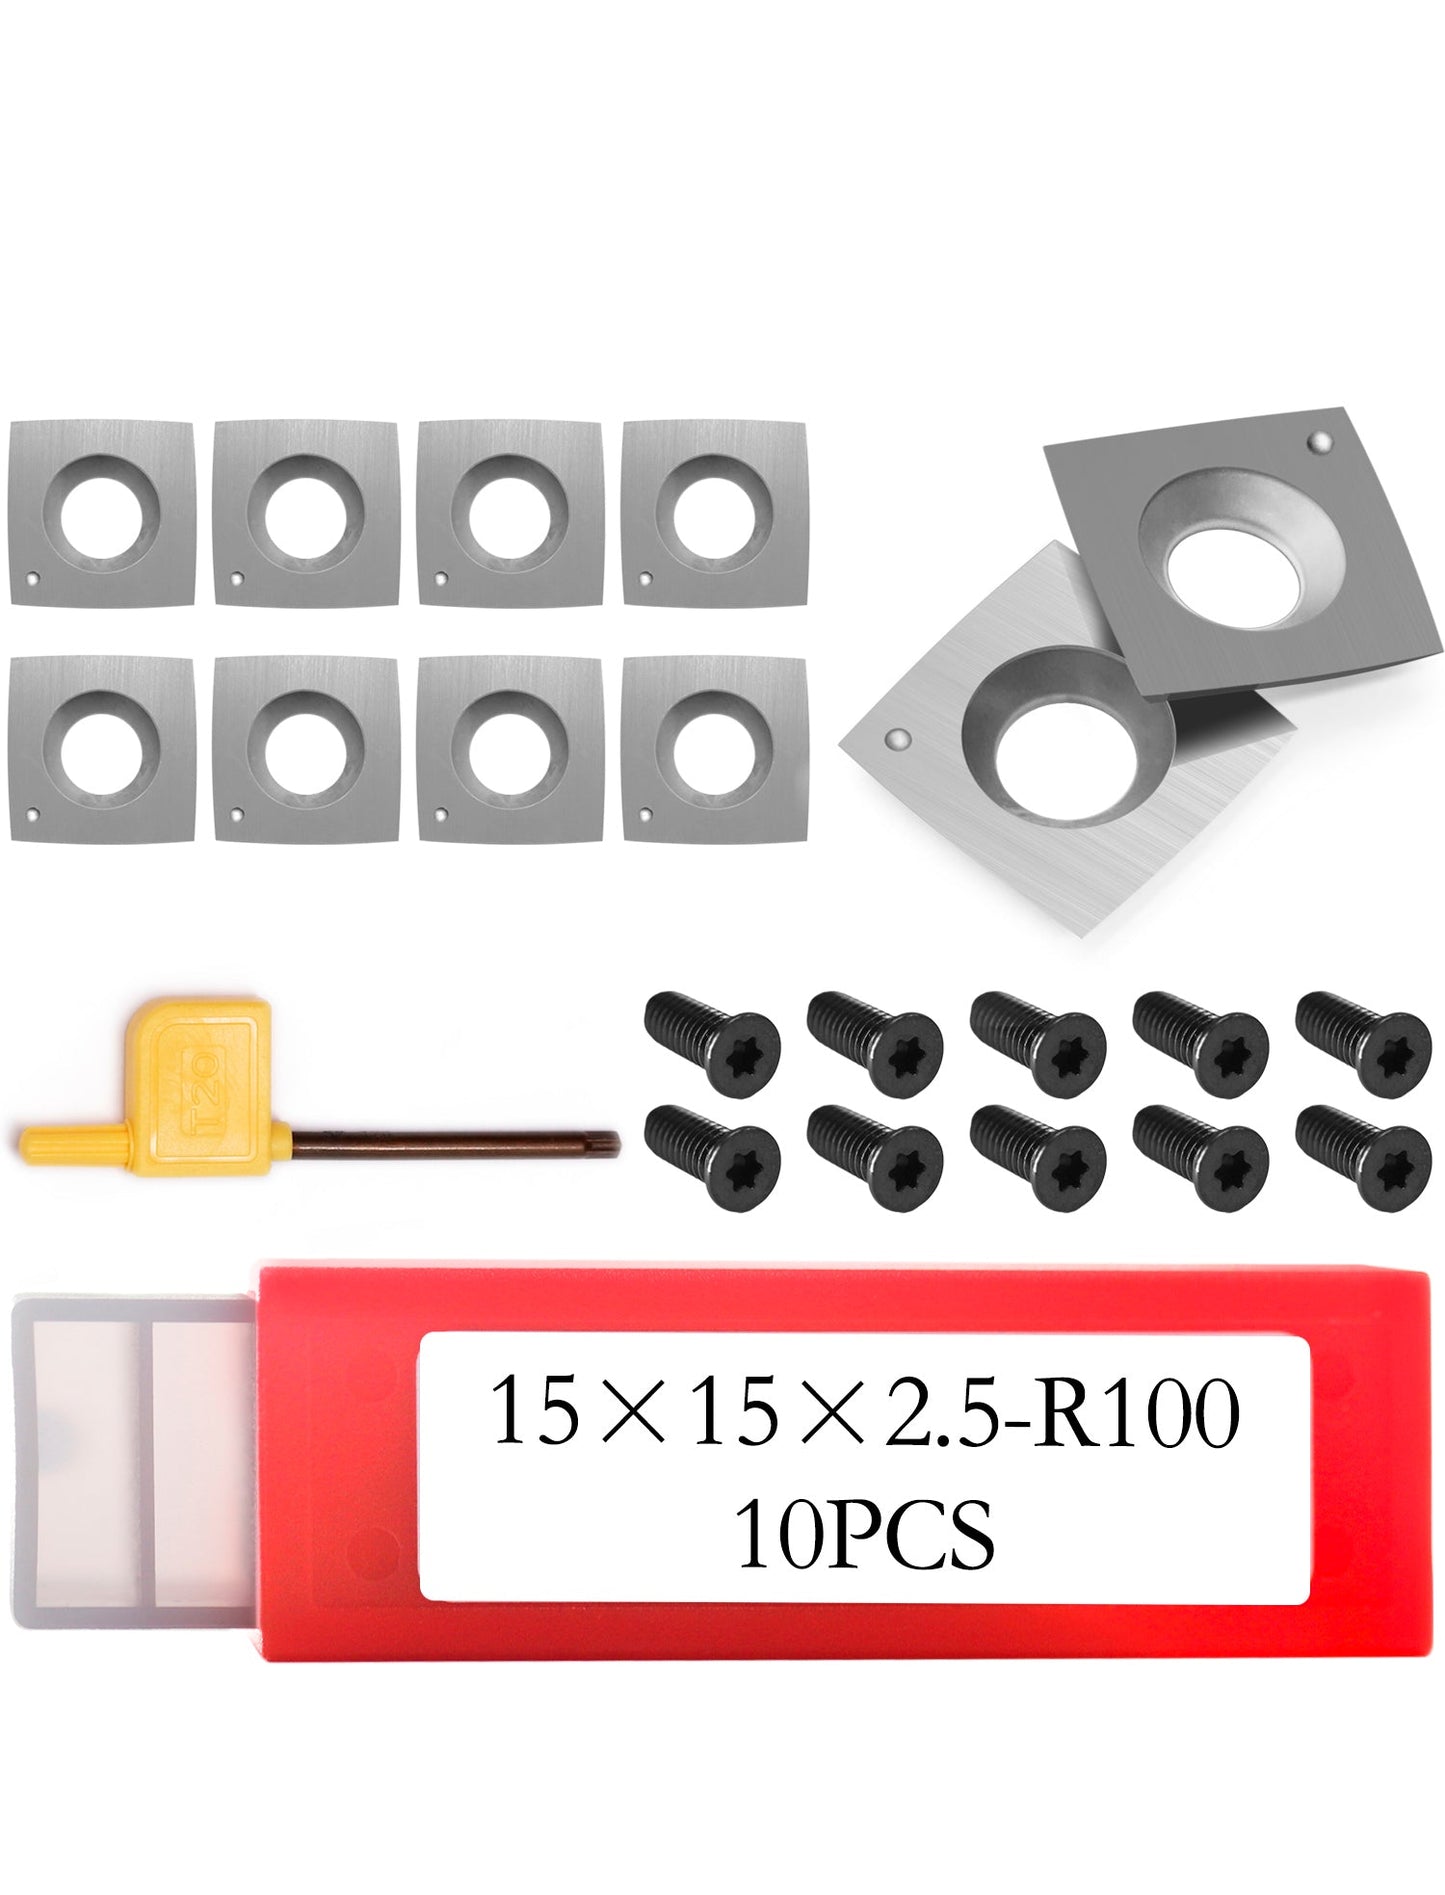 15x15x2.5mm-R100 Carbide Insert Replacement Grizzly H7354 for Shelix Cutterhead